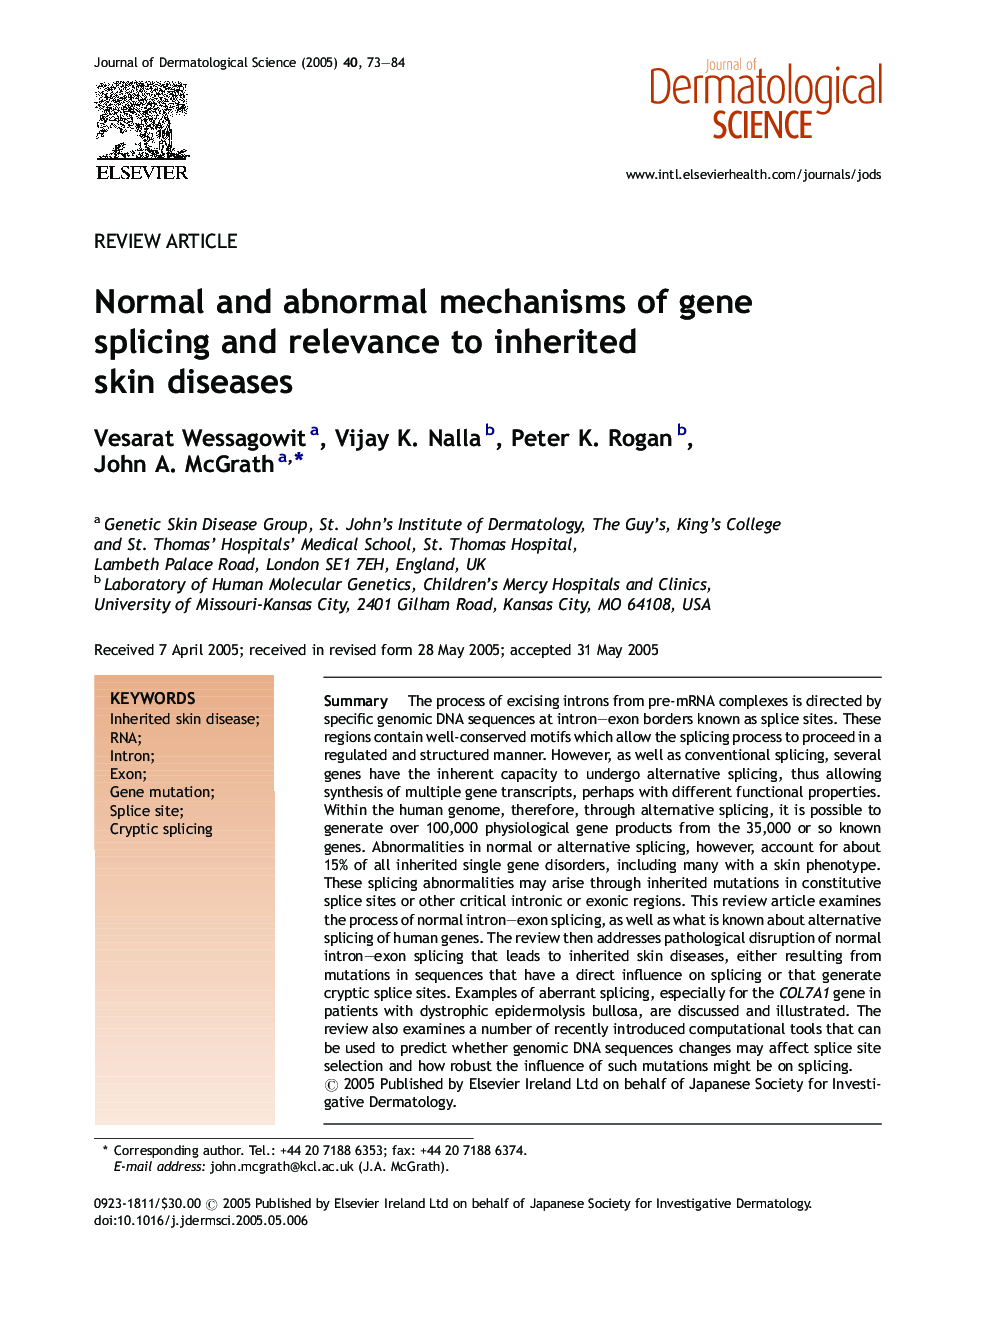 Normal and abnormal mechanisms of gene splicing and relevance to inherited skin diseases